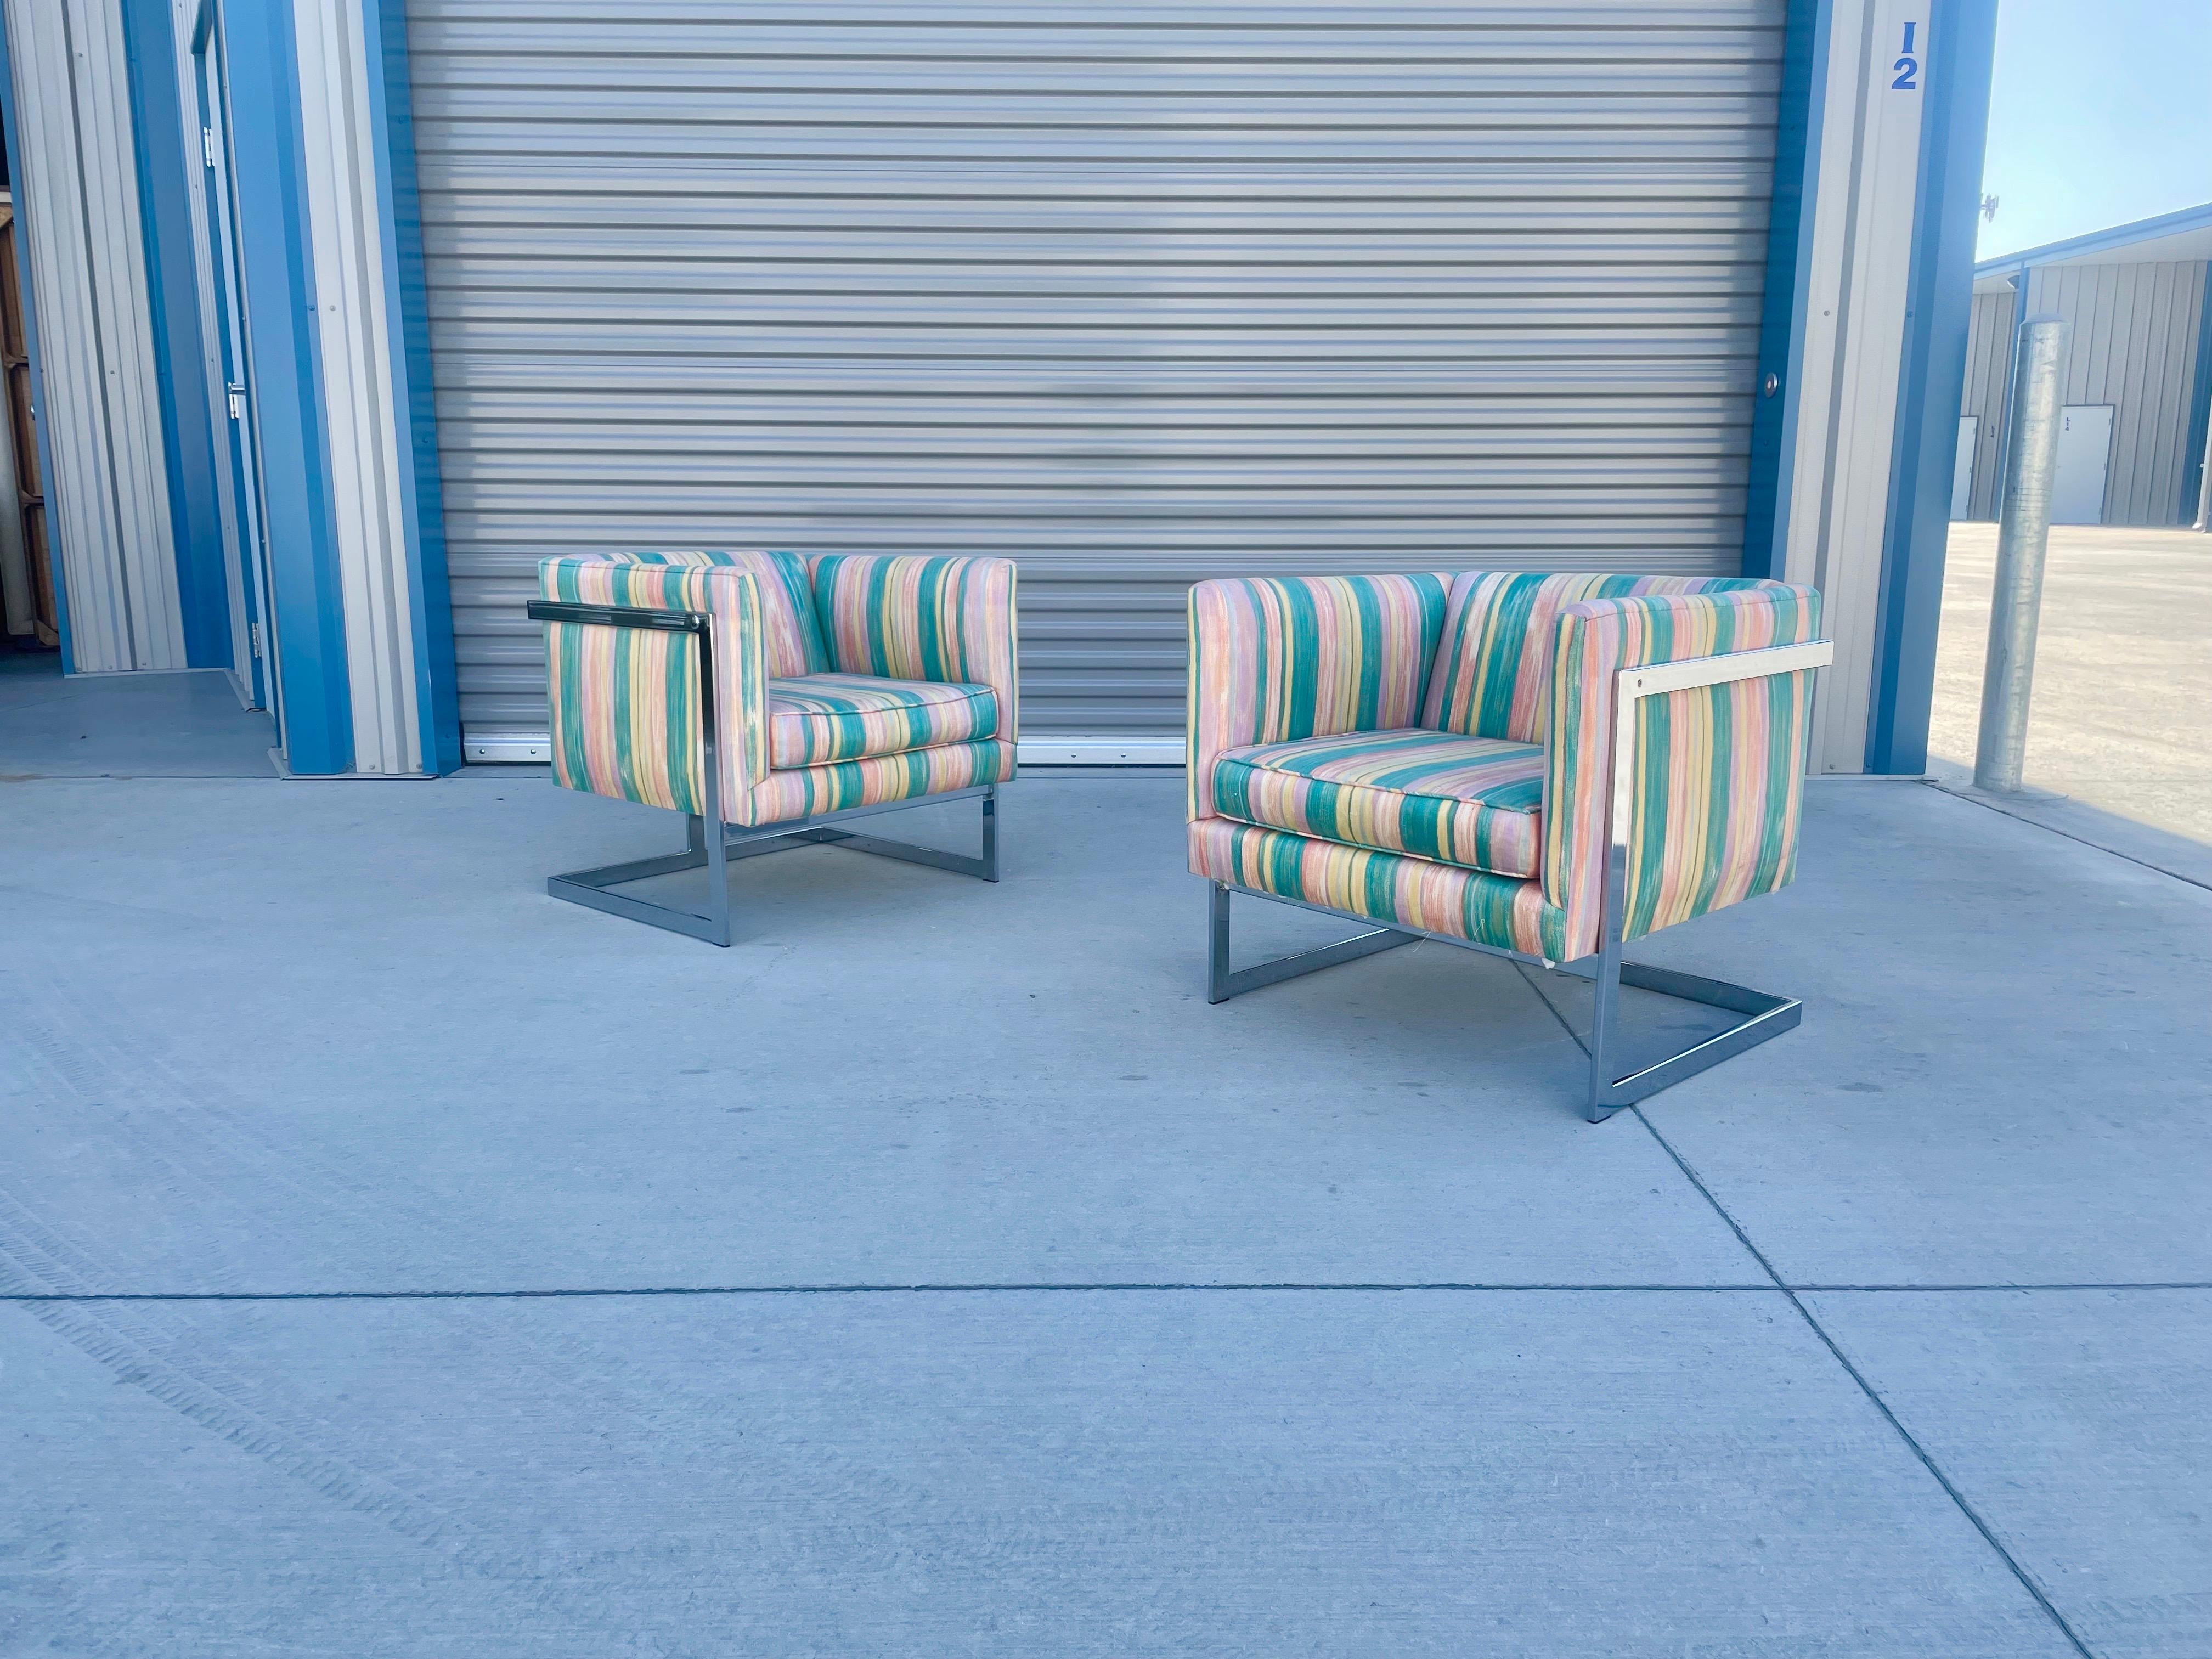 Midcentury lounge chairs were designed by Milo Baughman for Thayer Coggin. These vintage cube chairs feature a beautiful T-shape chrome base design adding sturdiness and a mid-century style. They also come with pink and green patterns upholstery,